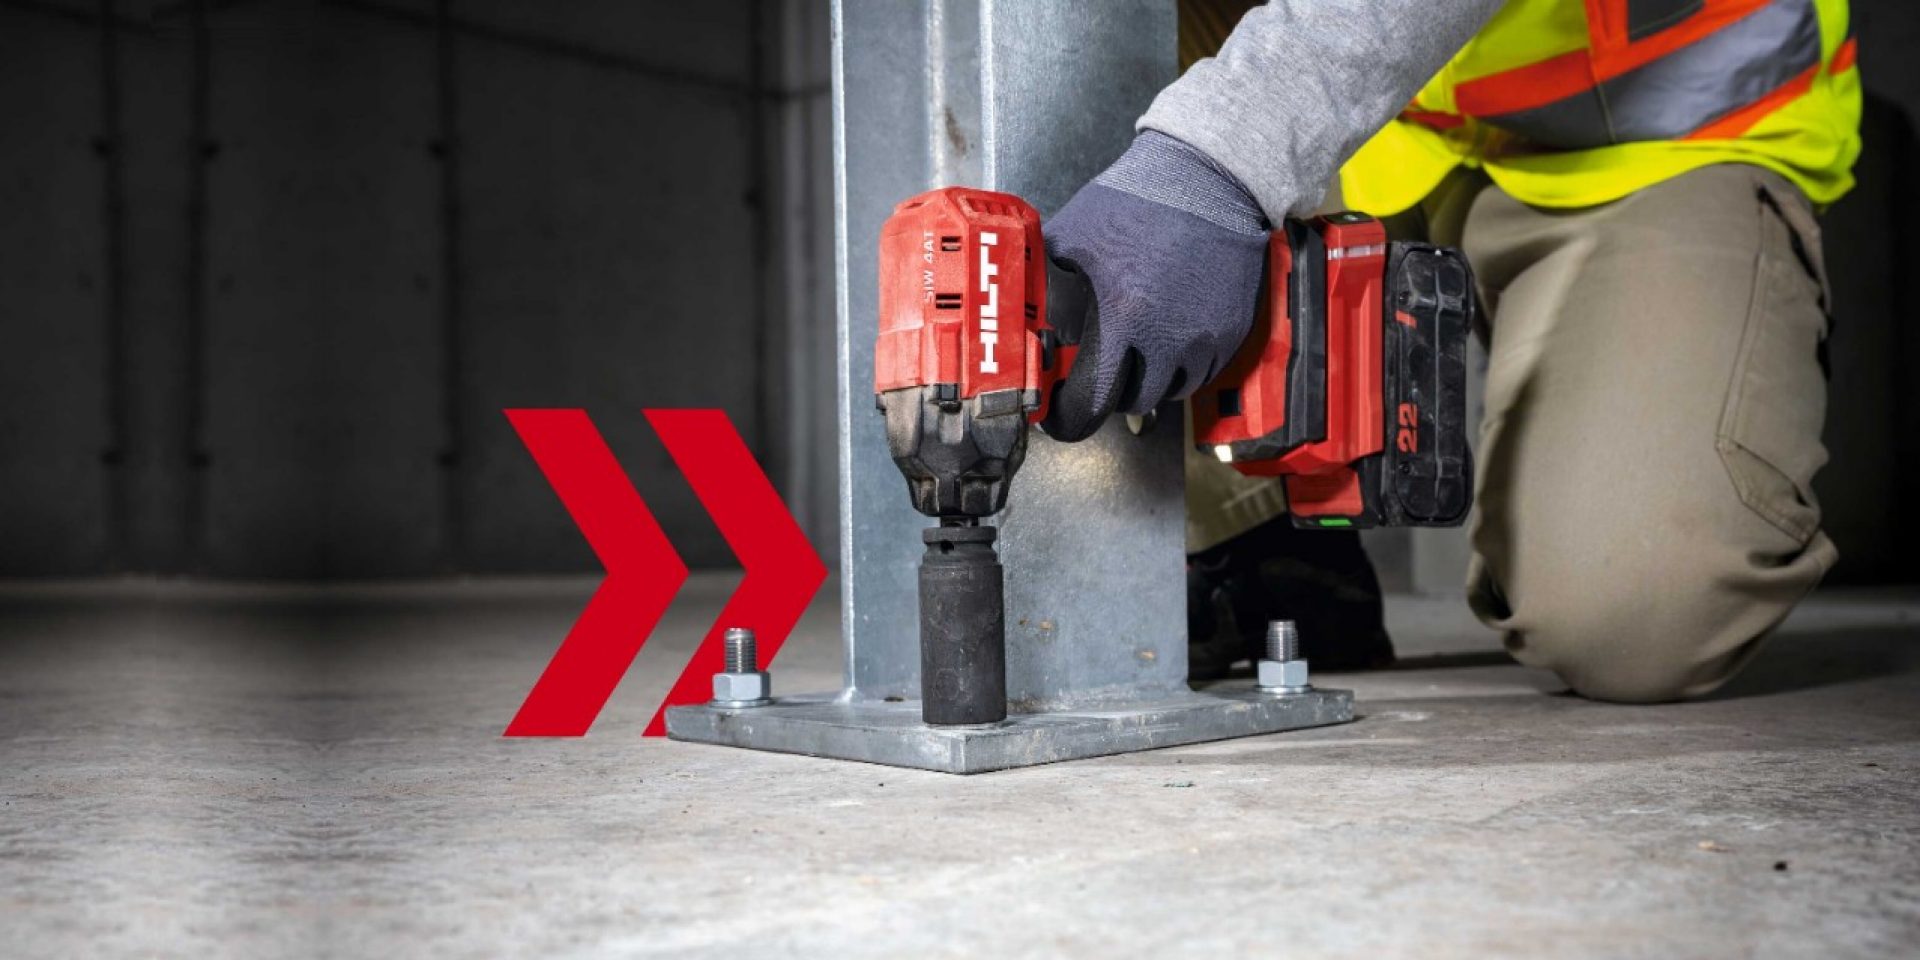 WORKER USING HILTI NURON IMPACT WRENCH